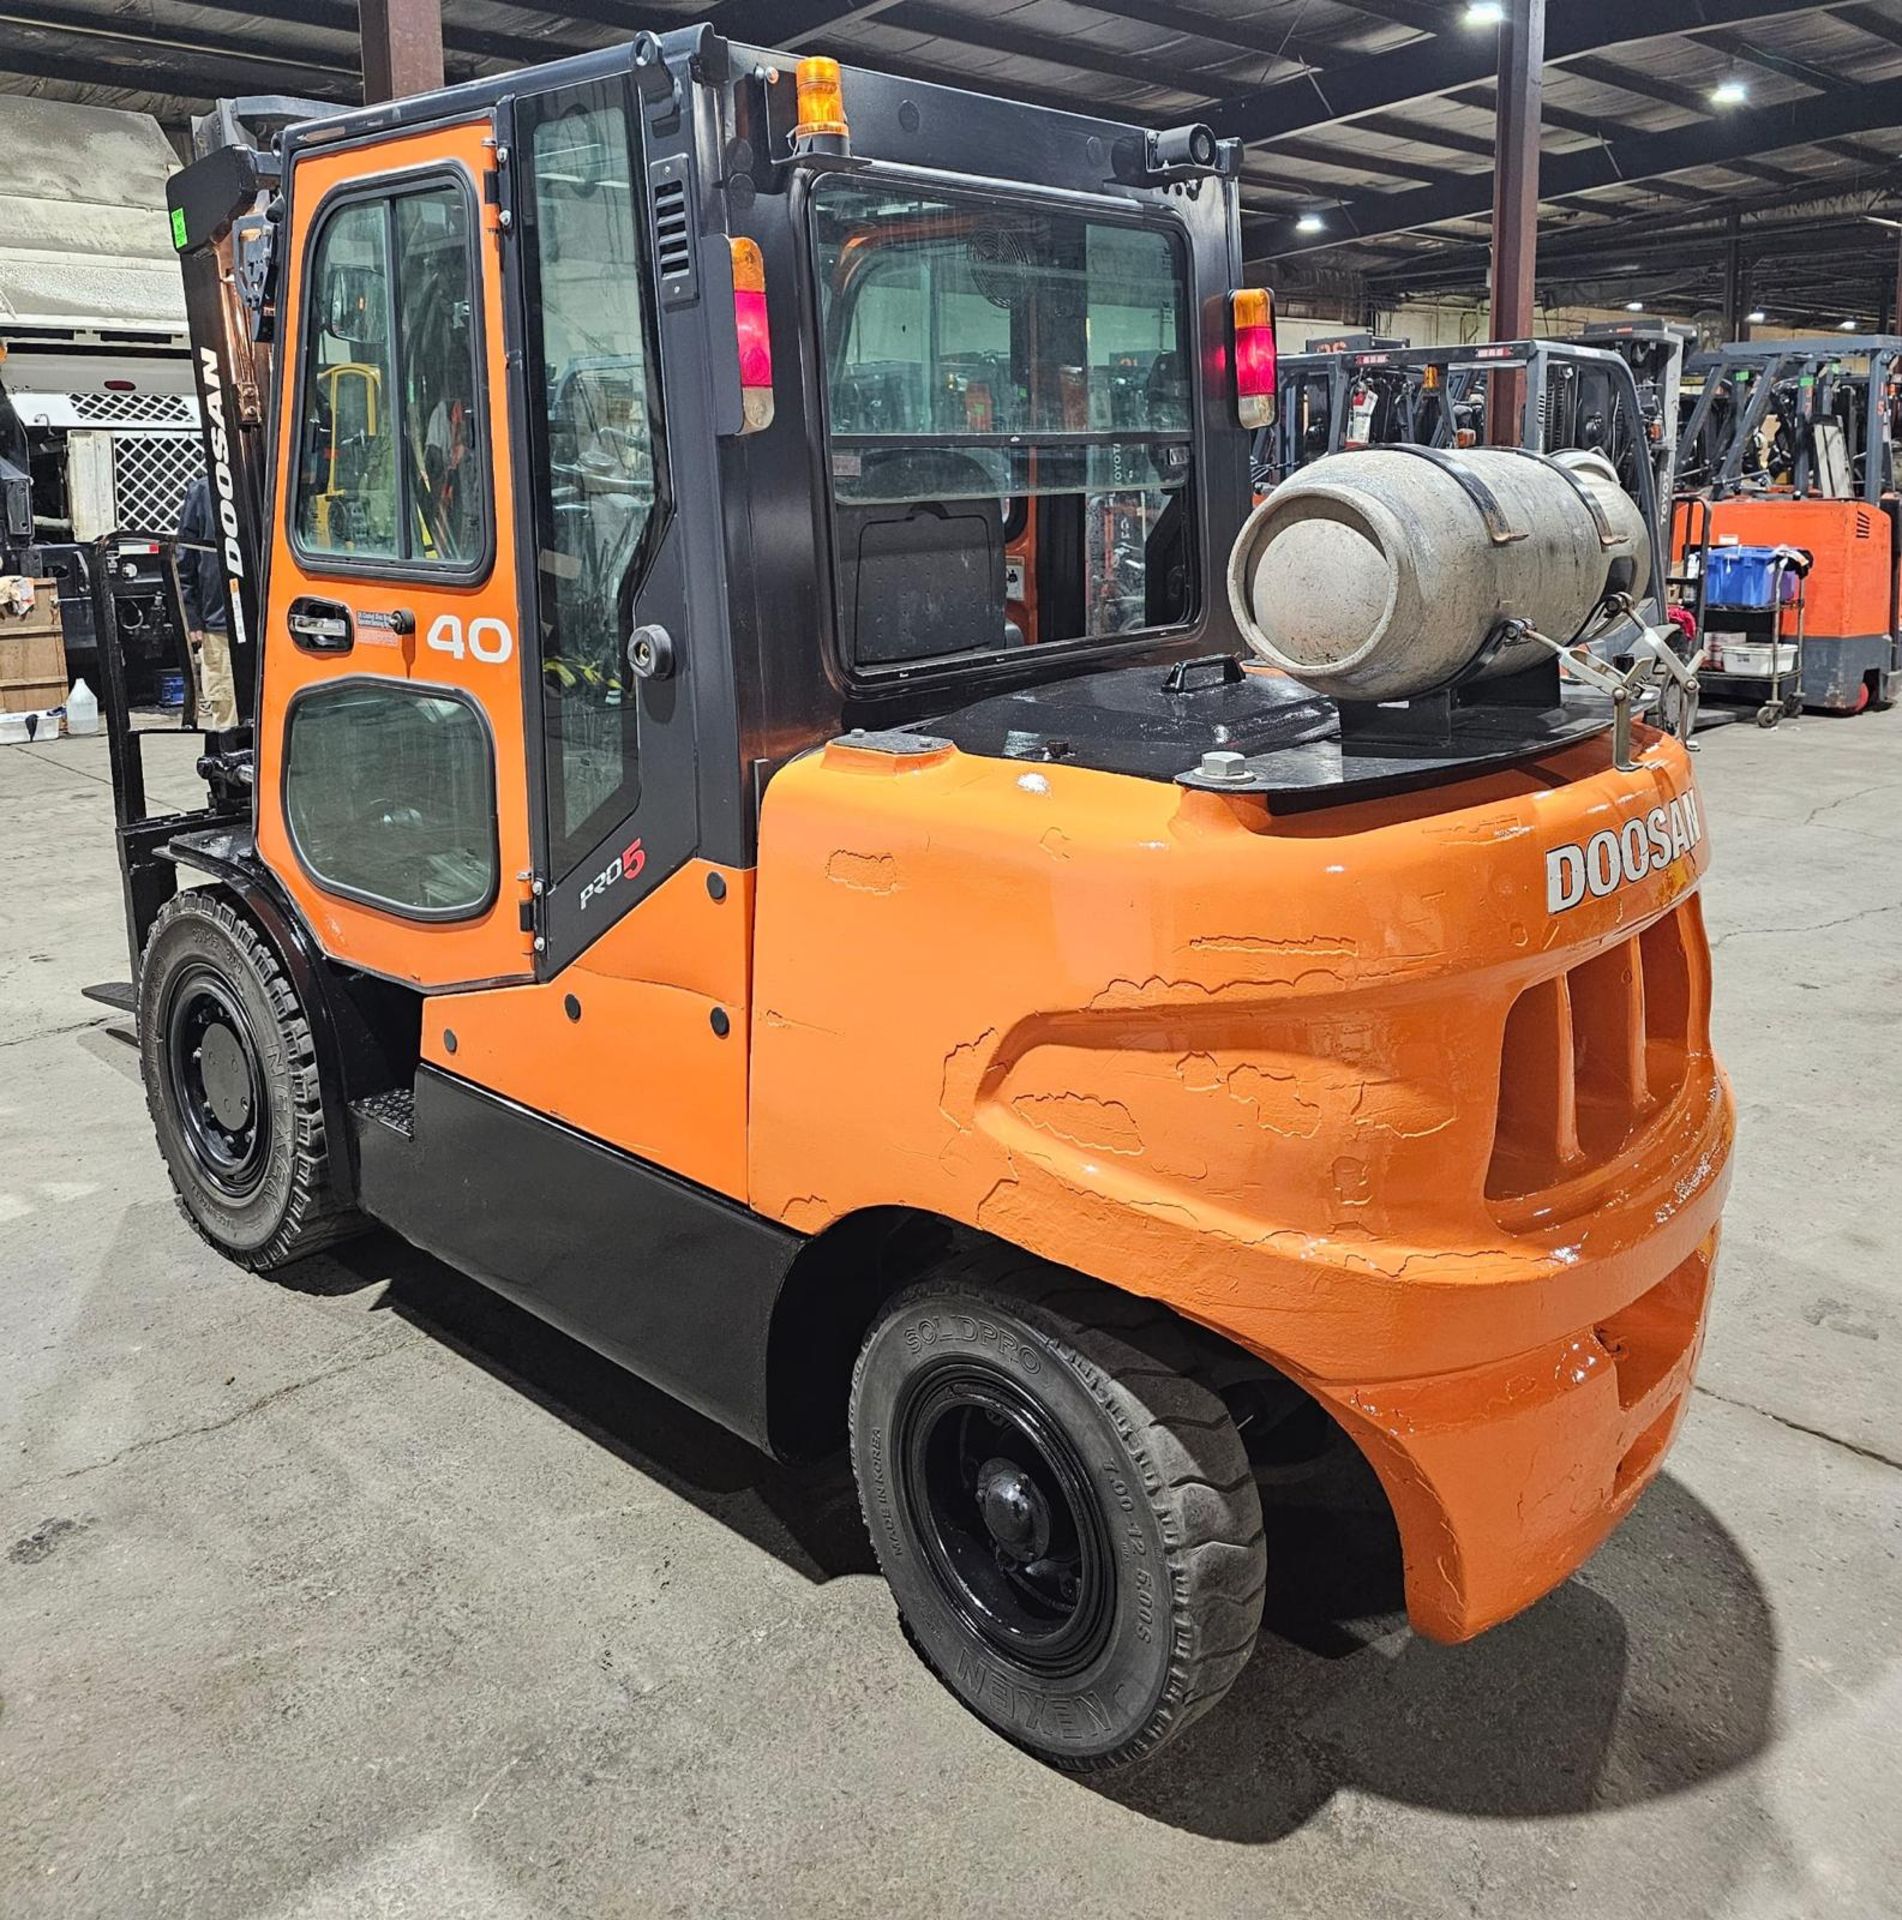 2017 Doosan 8,000 Capacity OUTDOOR LPG (Propane) Forklift with sideshift & 3-STAGE MAST 185" load - Image 4 of 8